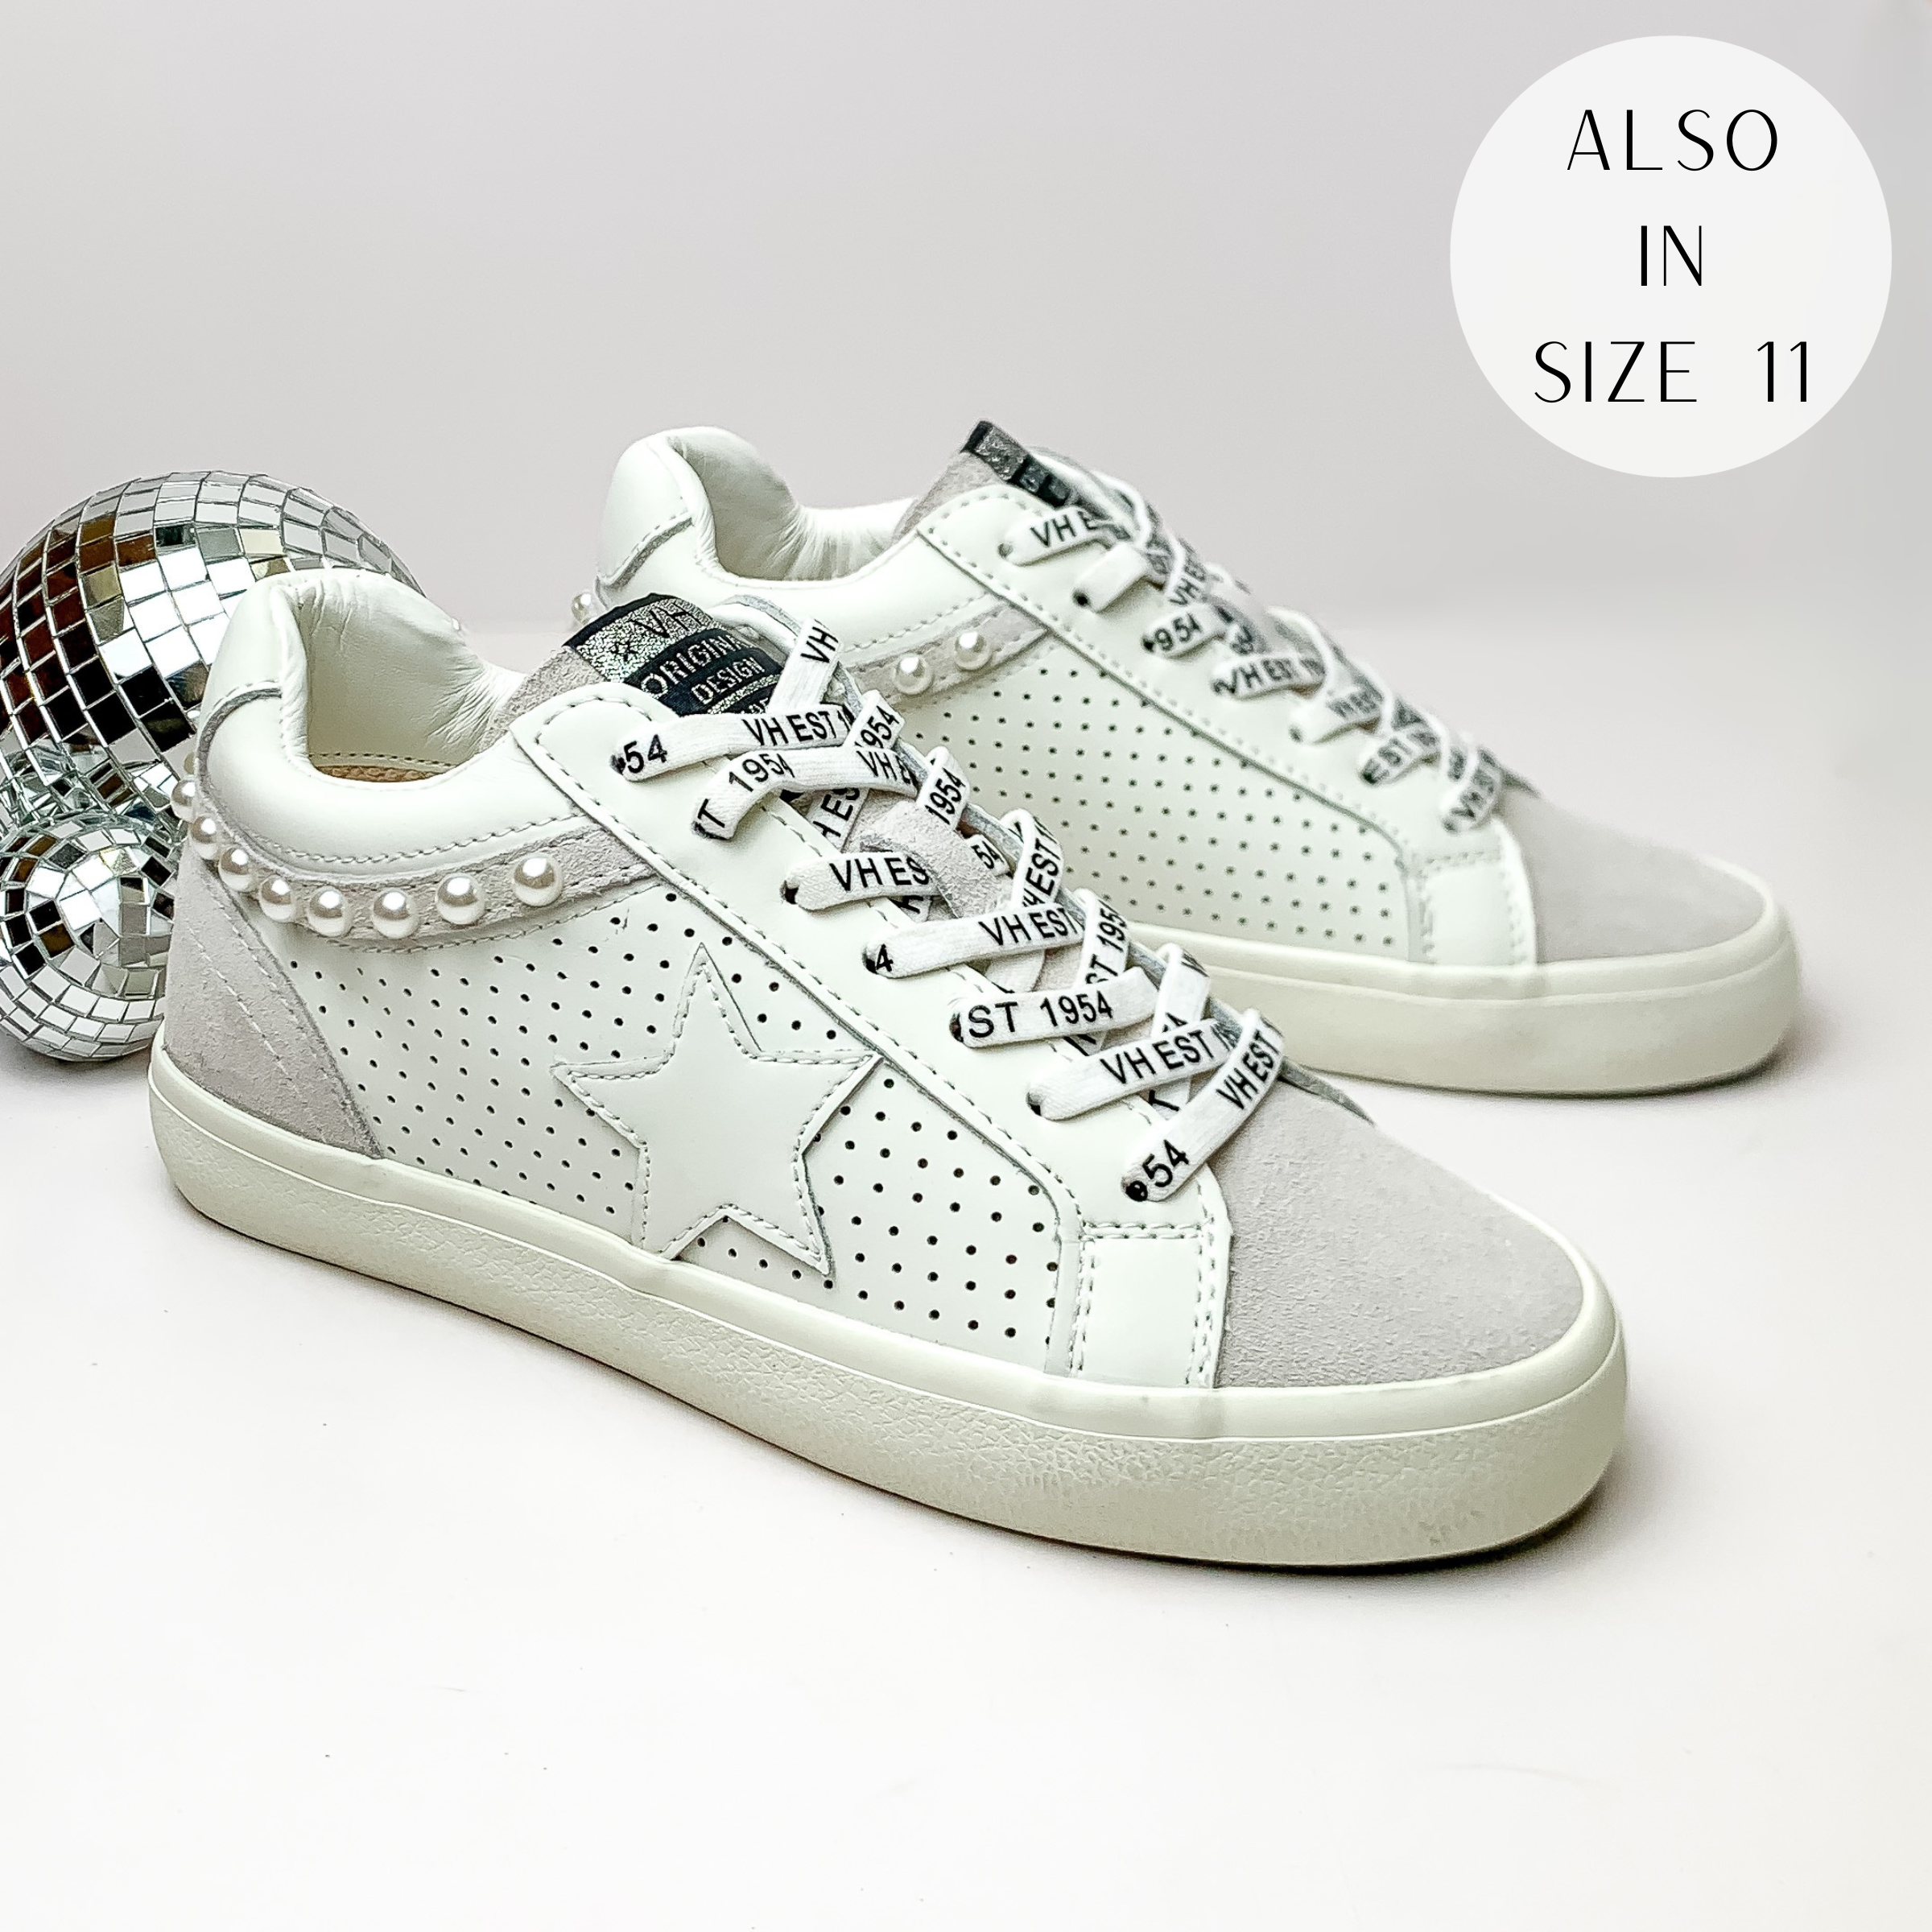 Pictured is a pair of white tennis shoes with white laces, grey detailing, and a faux pearl outline. These shoes also include a white star on the side. These shoes are pictured on a white background with disco balls on the left side